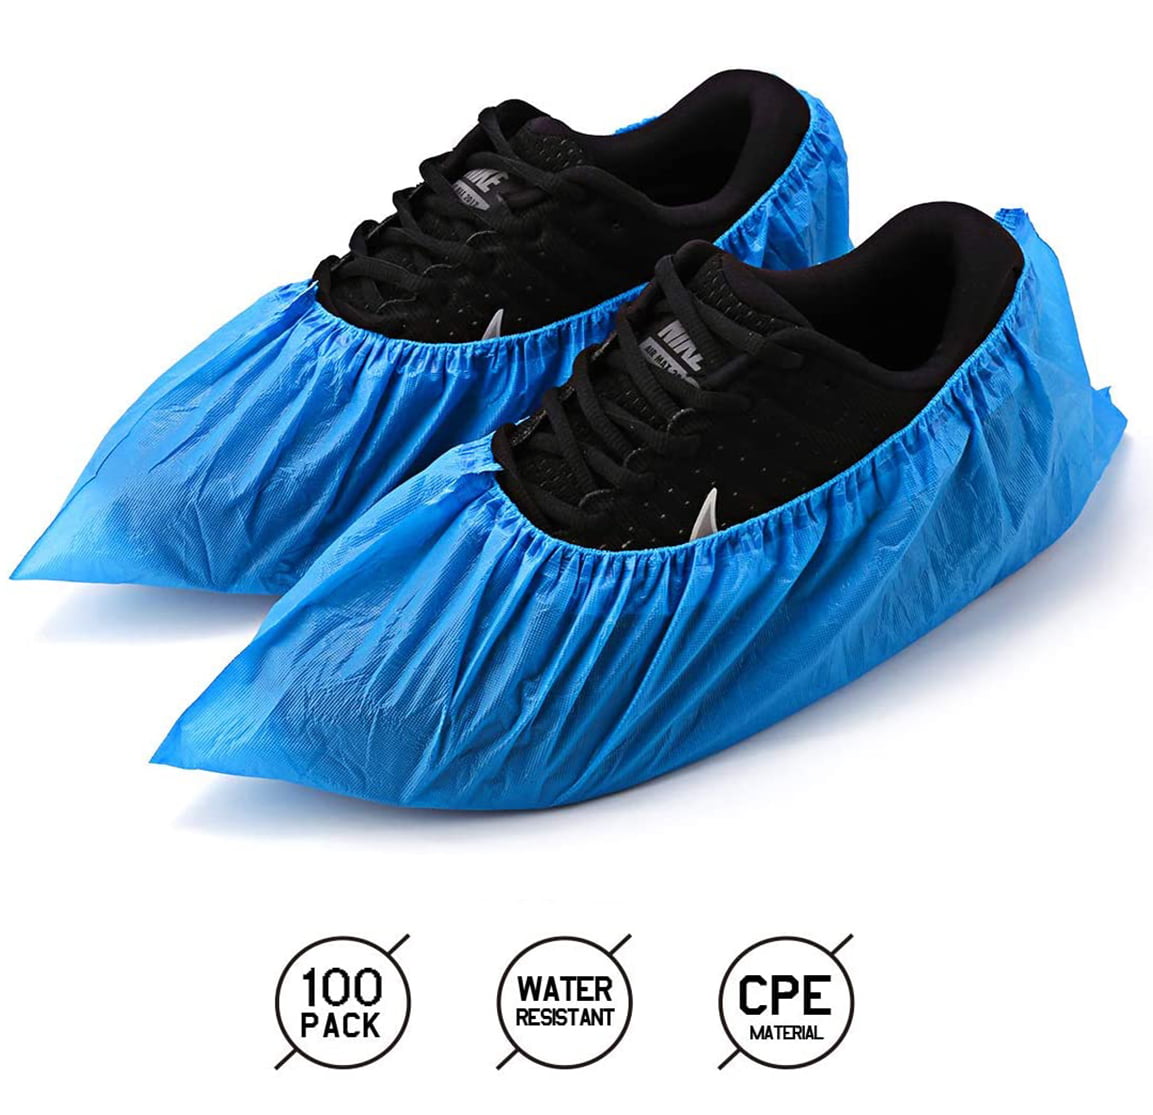 Shoe Covers Disposable 100 Pack Disposable Shoe /& Boot Covers Waterproof Non-Slip Shoe Booties,Household Dust-Proof Shoes Cover